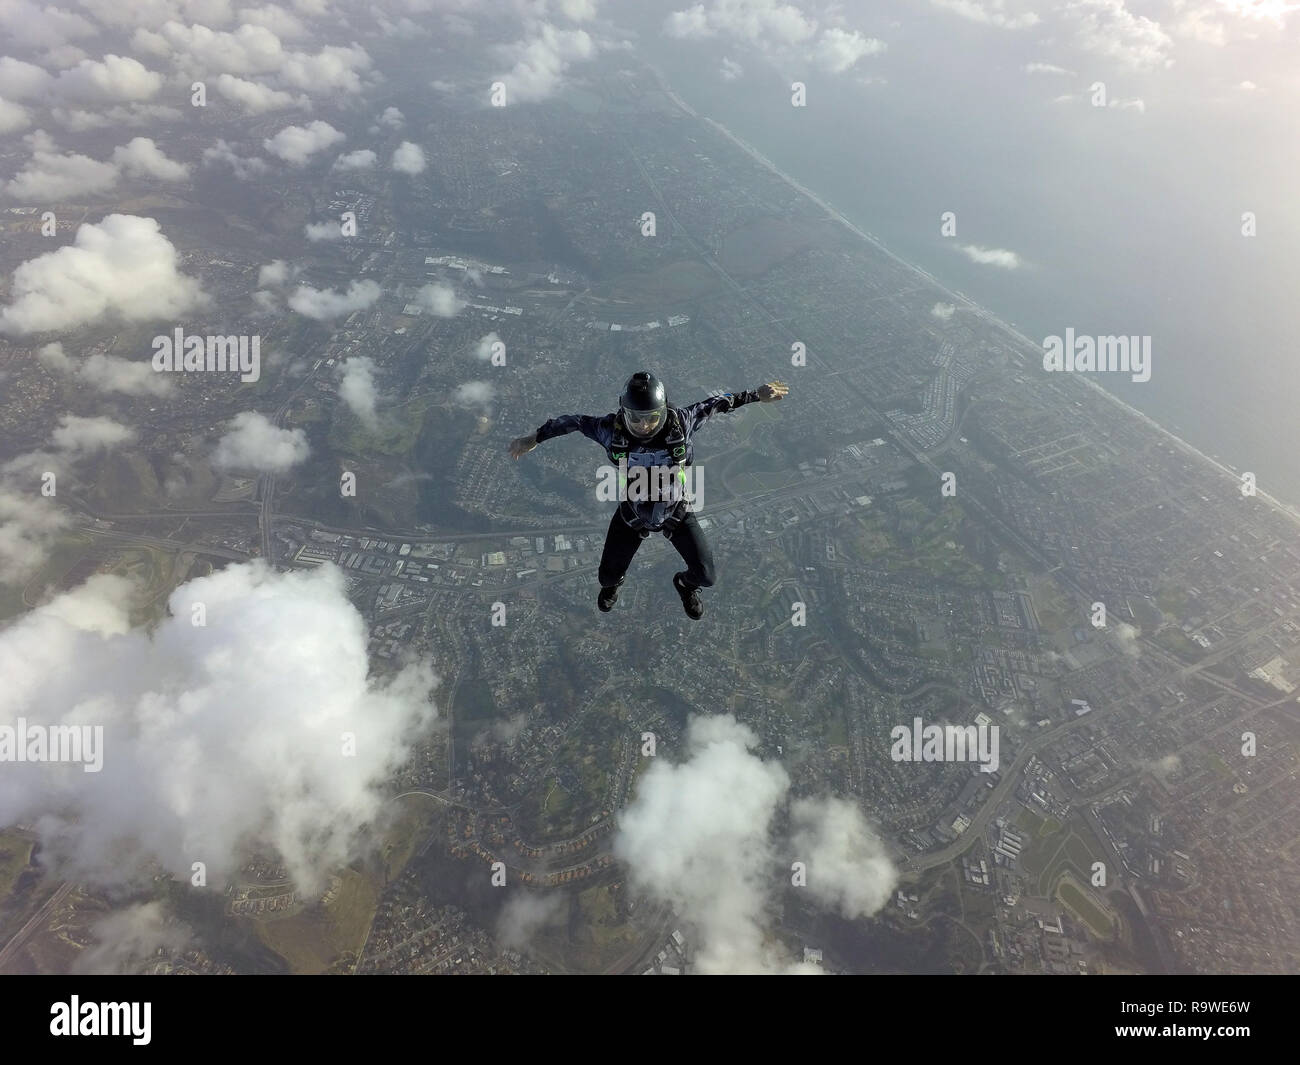 This freefly skydiver is practice different freestyle positions in the blue sky over some clouds with a big smile on his face. Stock Photo